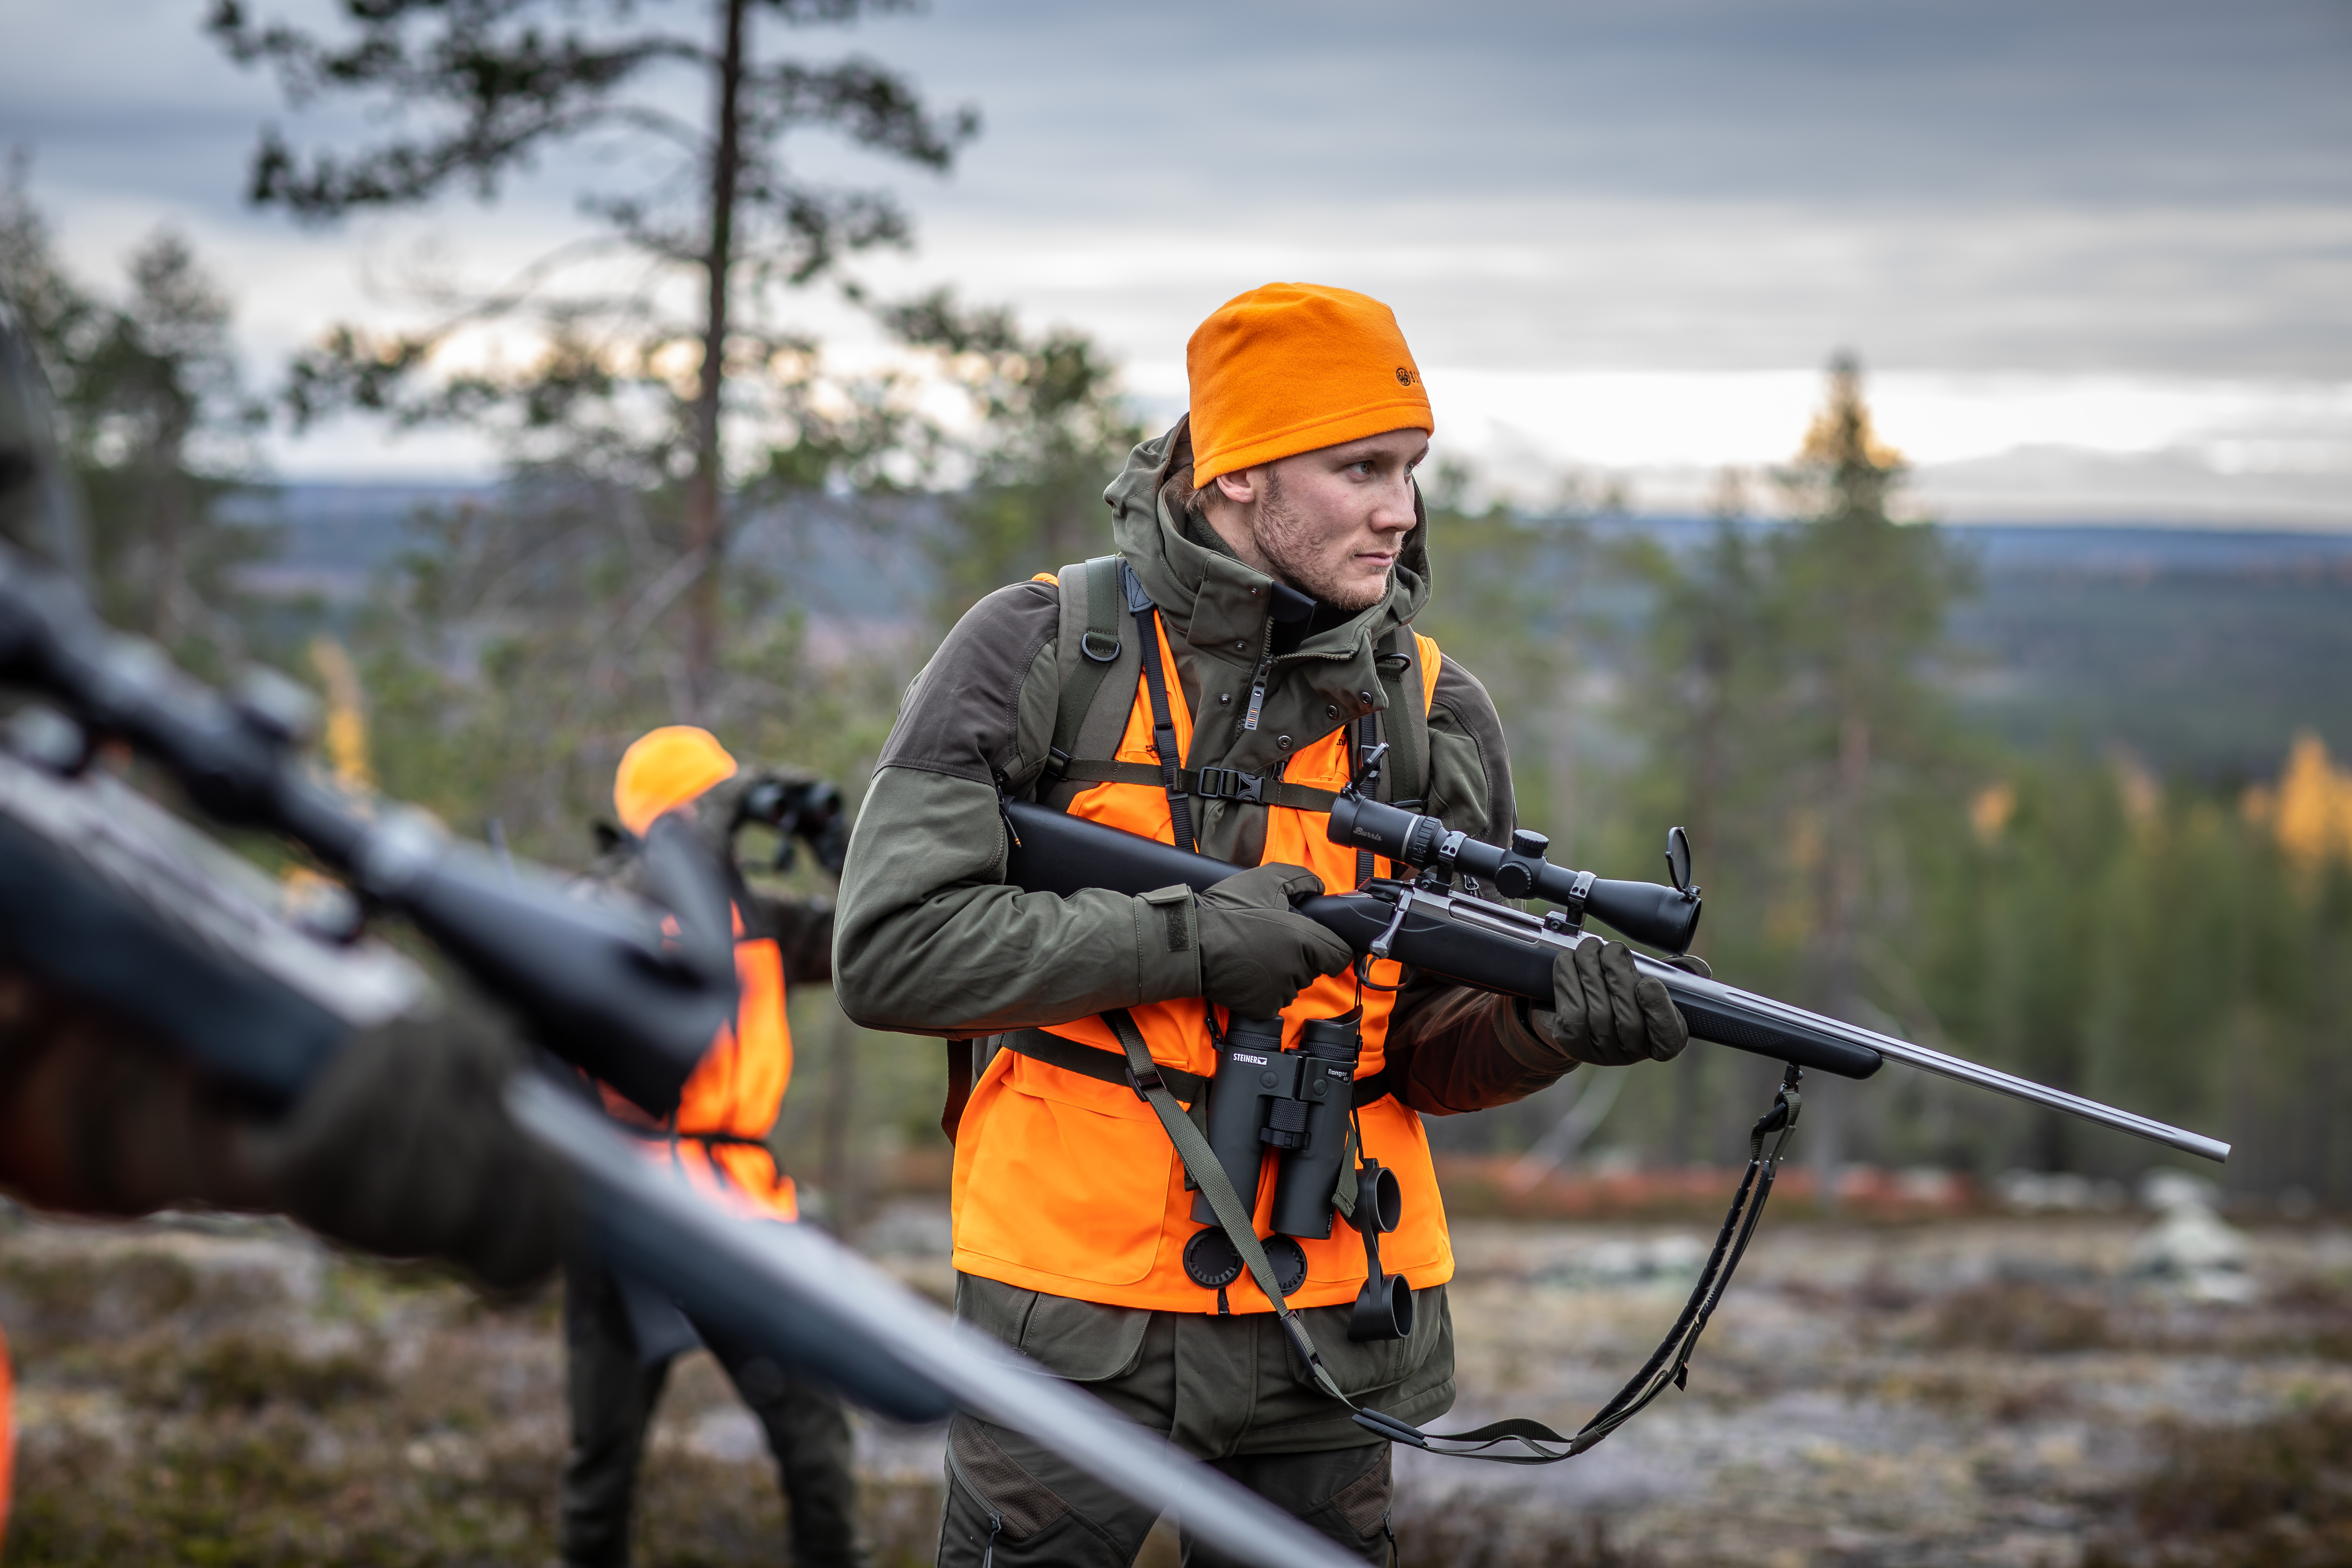 Sako and Tikka rifles support - Frequently asked questions